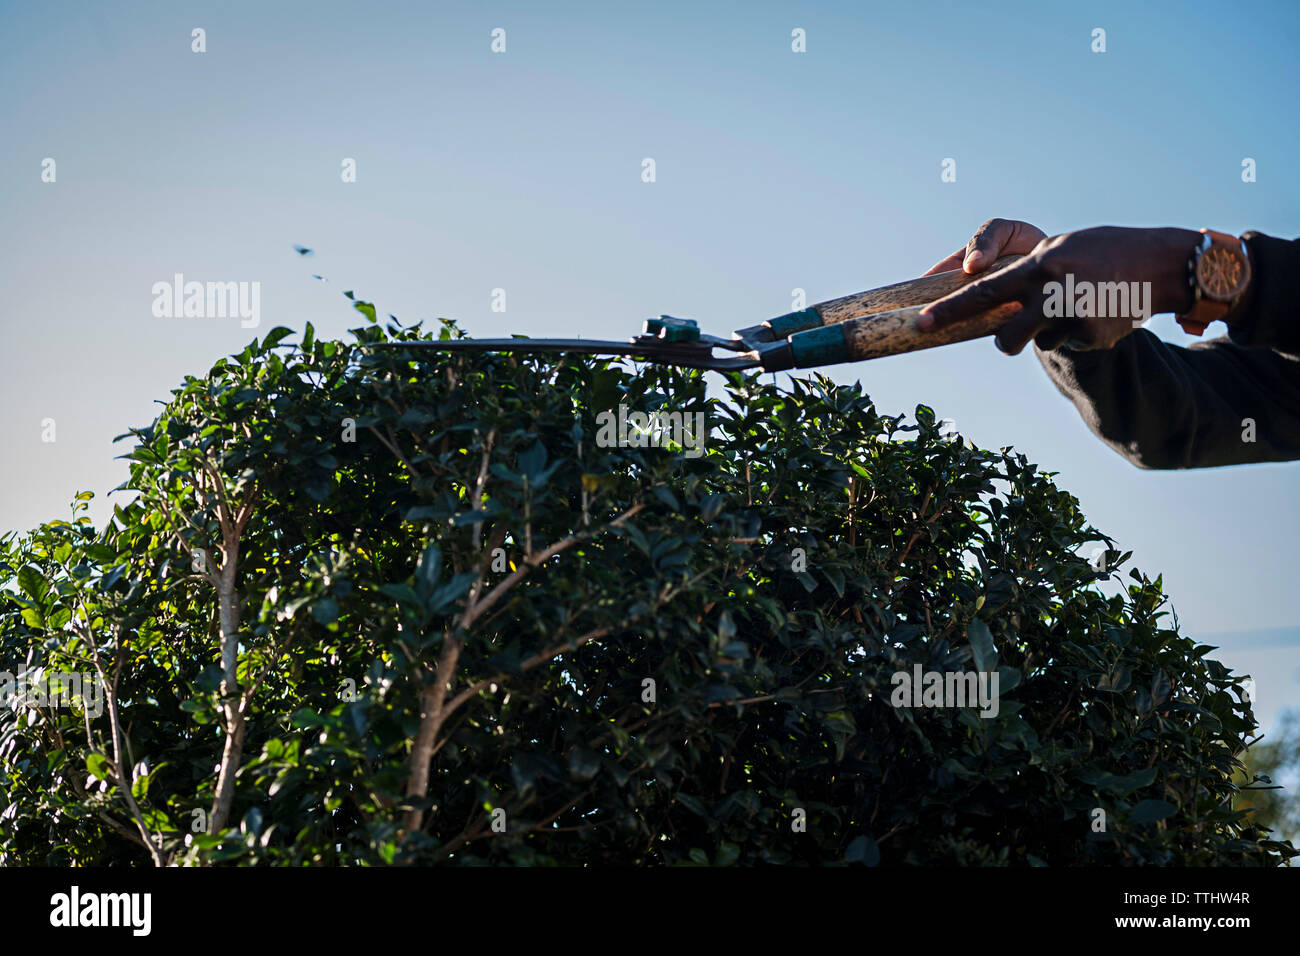 Hedge being trimmed with garden shears Stock Photo